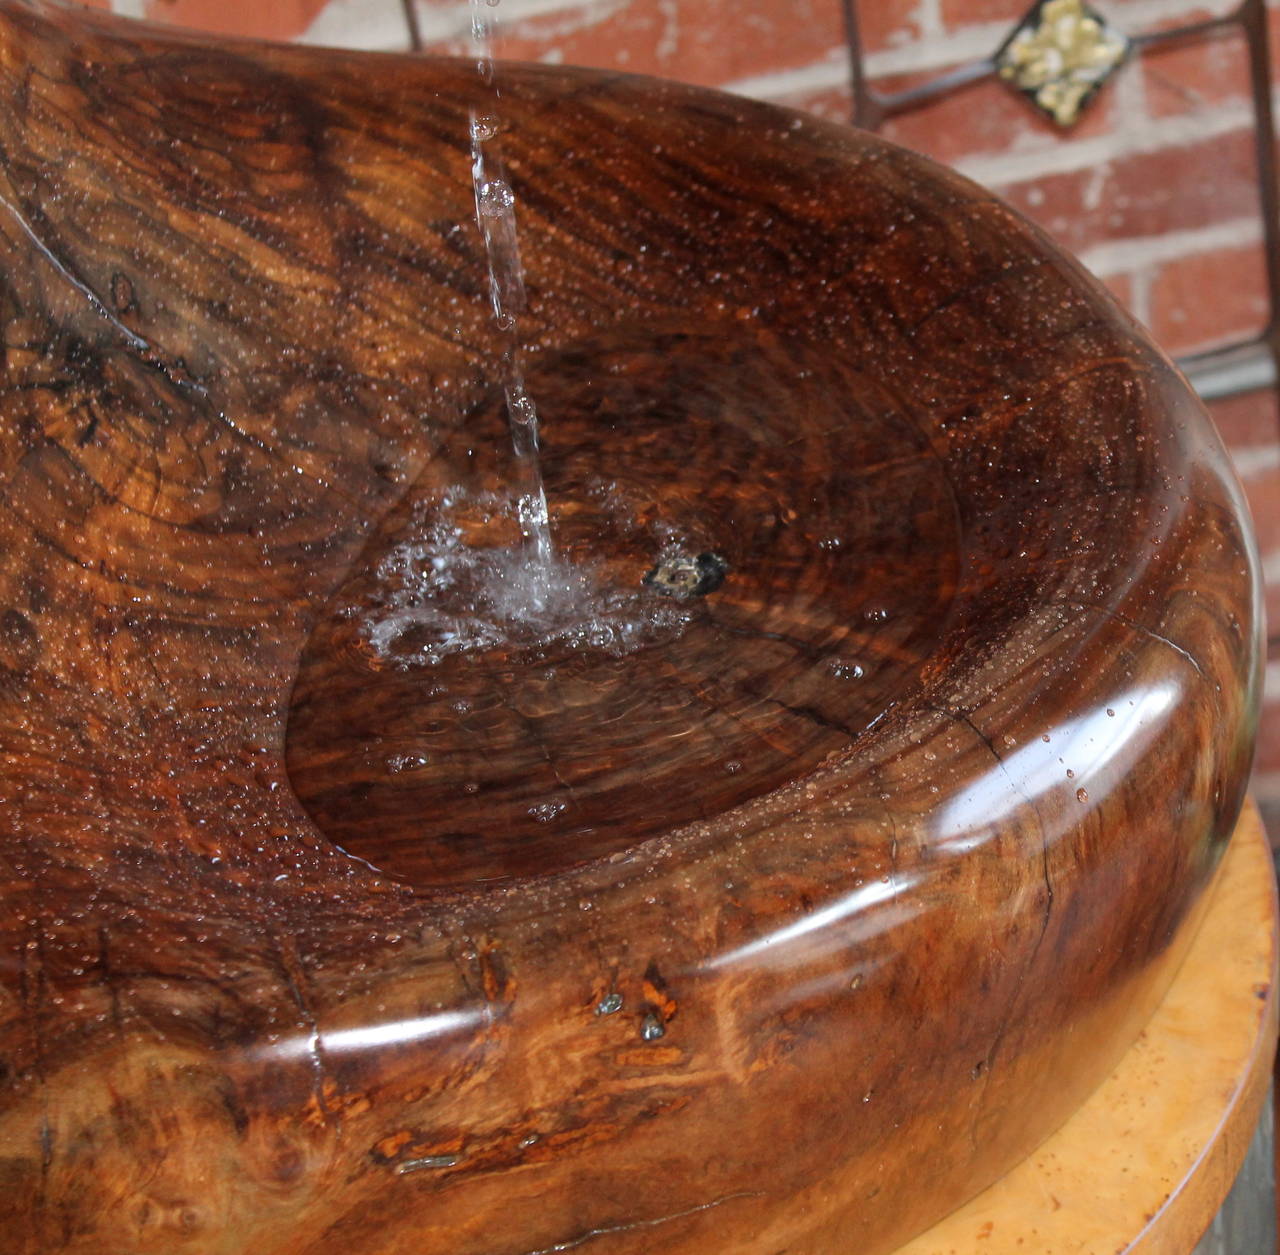 Burl Sculptural Cocobolo Tropical Wood Fountain by Don Shoemaker, Mexico, circa 1970 For Sale